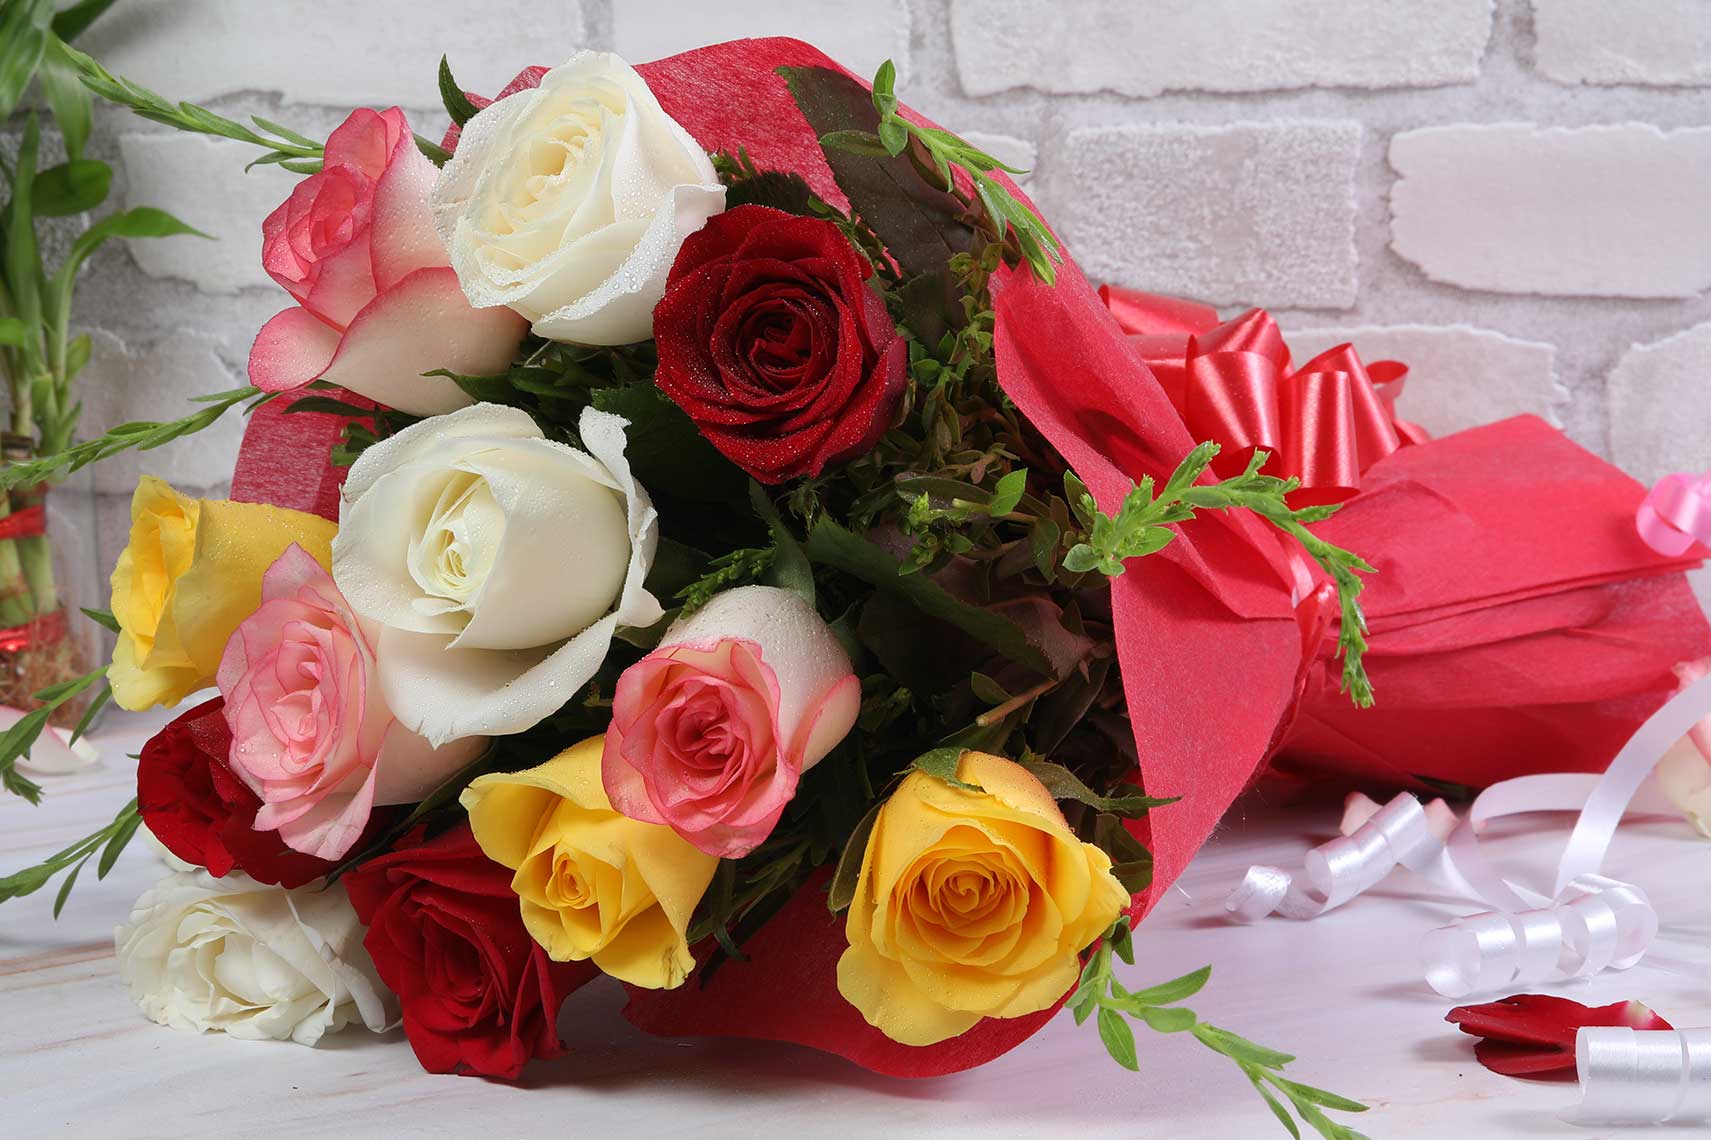 Rainbow rose collective bouquet 